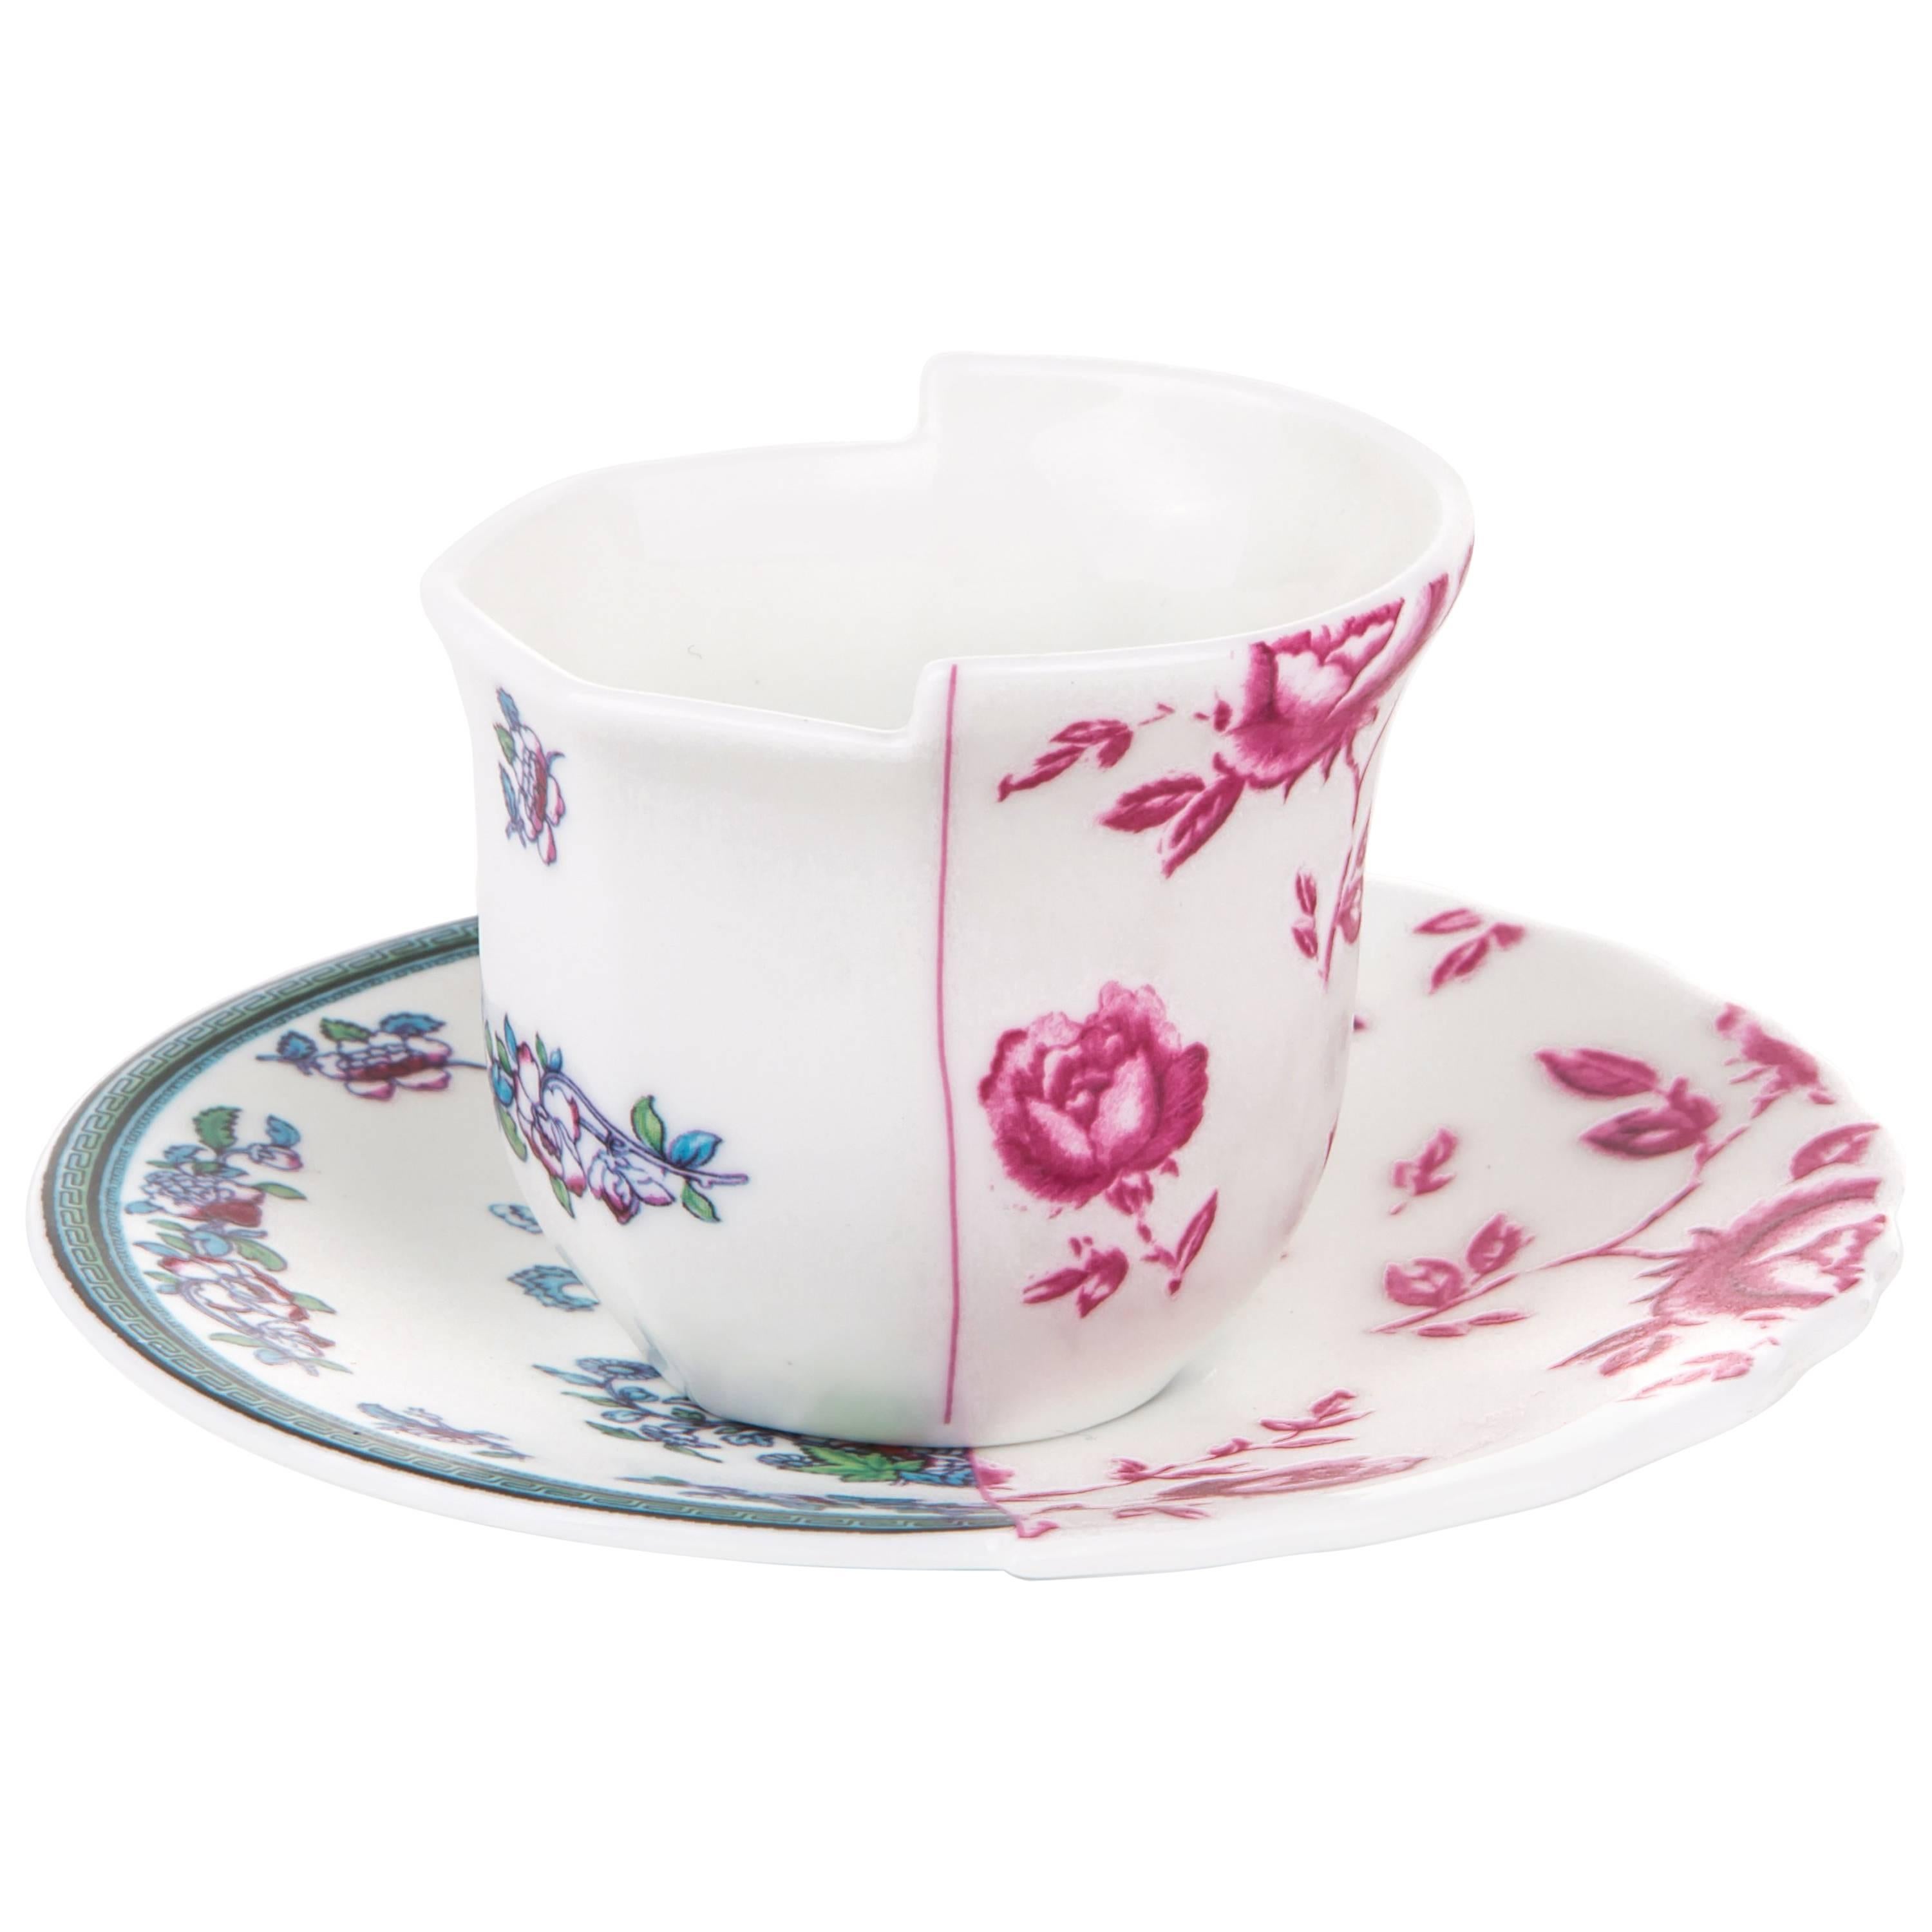 Seletti 'Hybrid-Leonia' Coffee Cup with Saucer in Porcelain For Sale